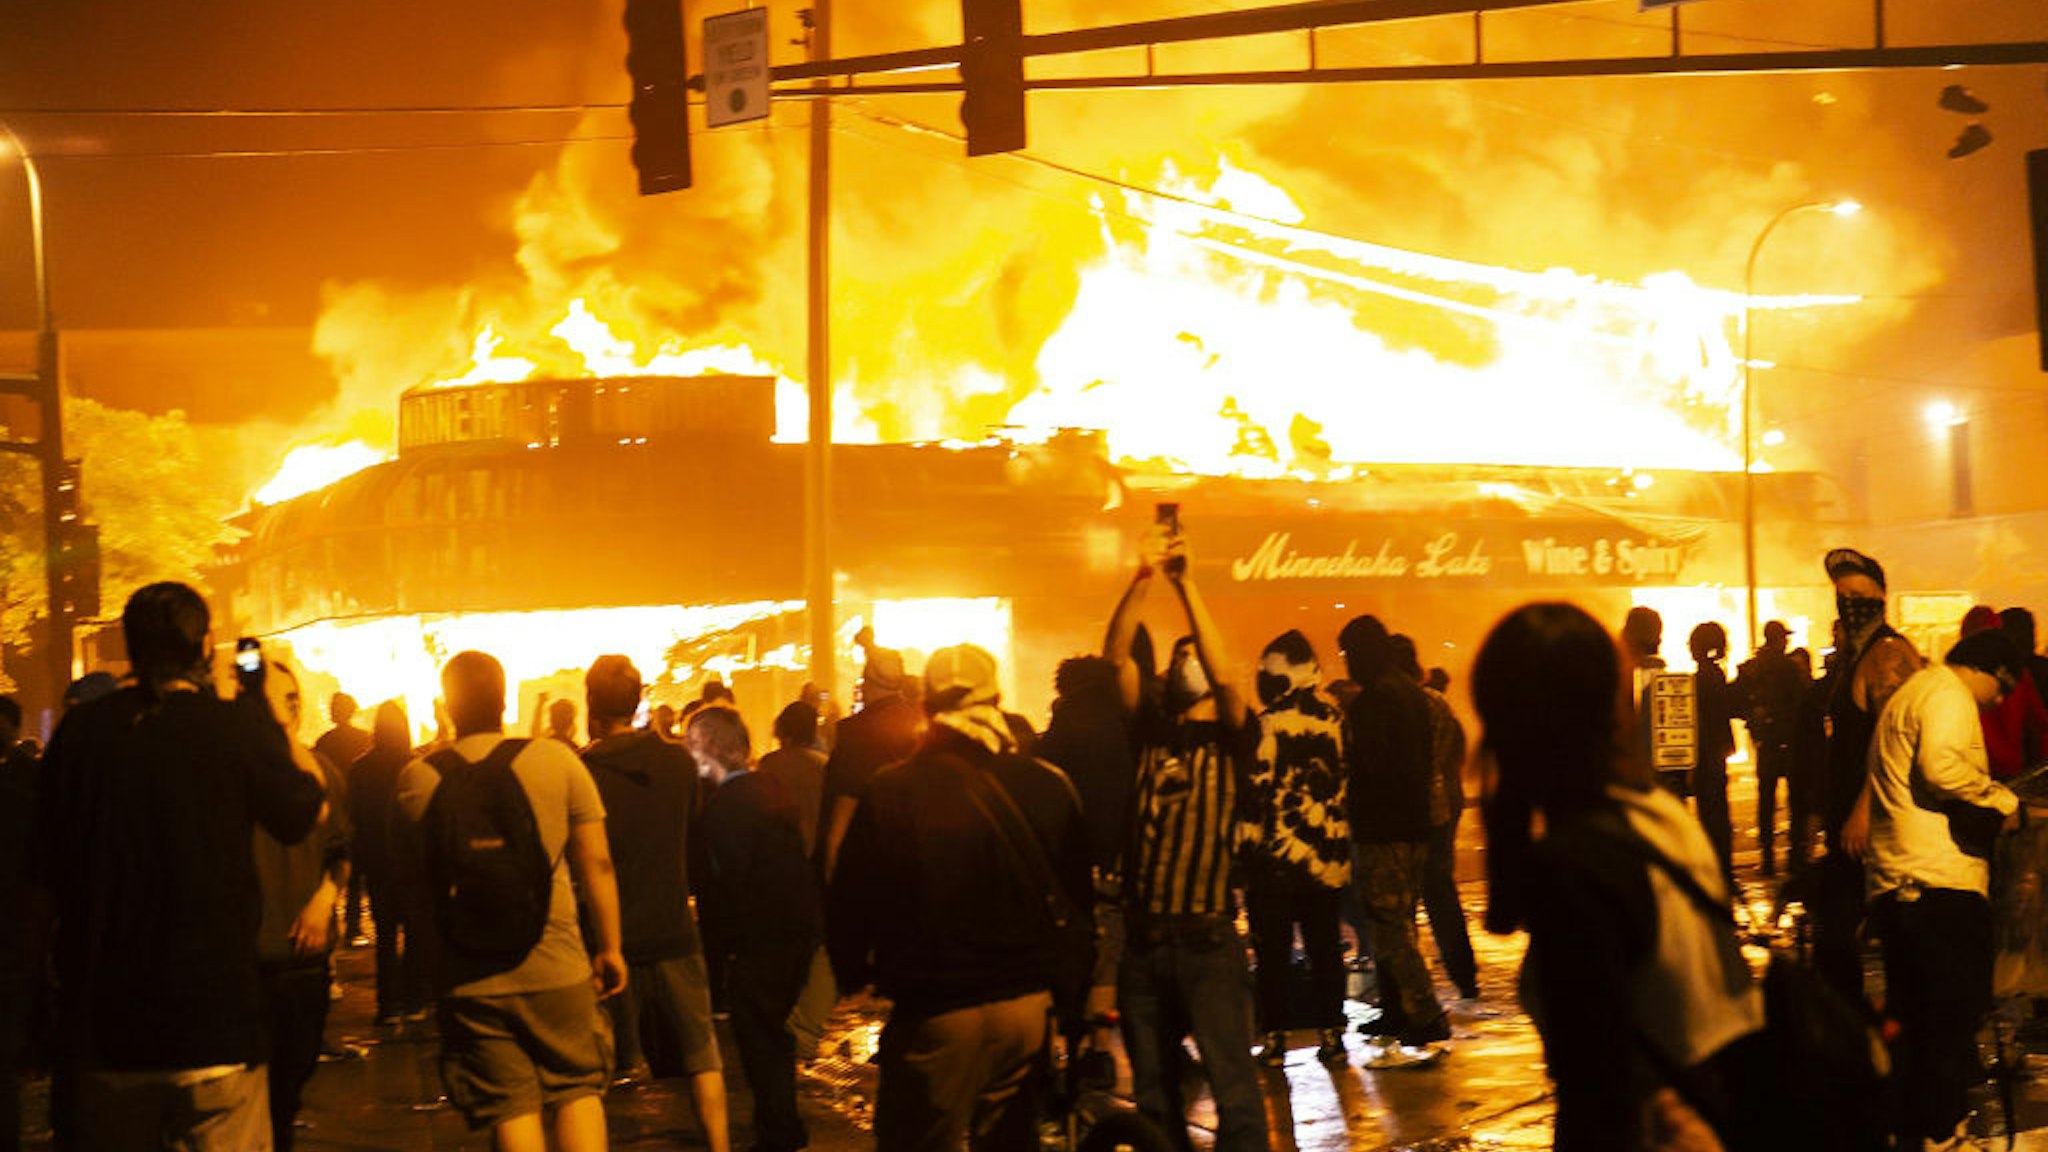 Protestors set a shop on fire on Thursday, May 28, 2020, during the third day of protests over the death of George Floyd in Minneapolis.